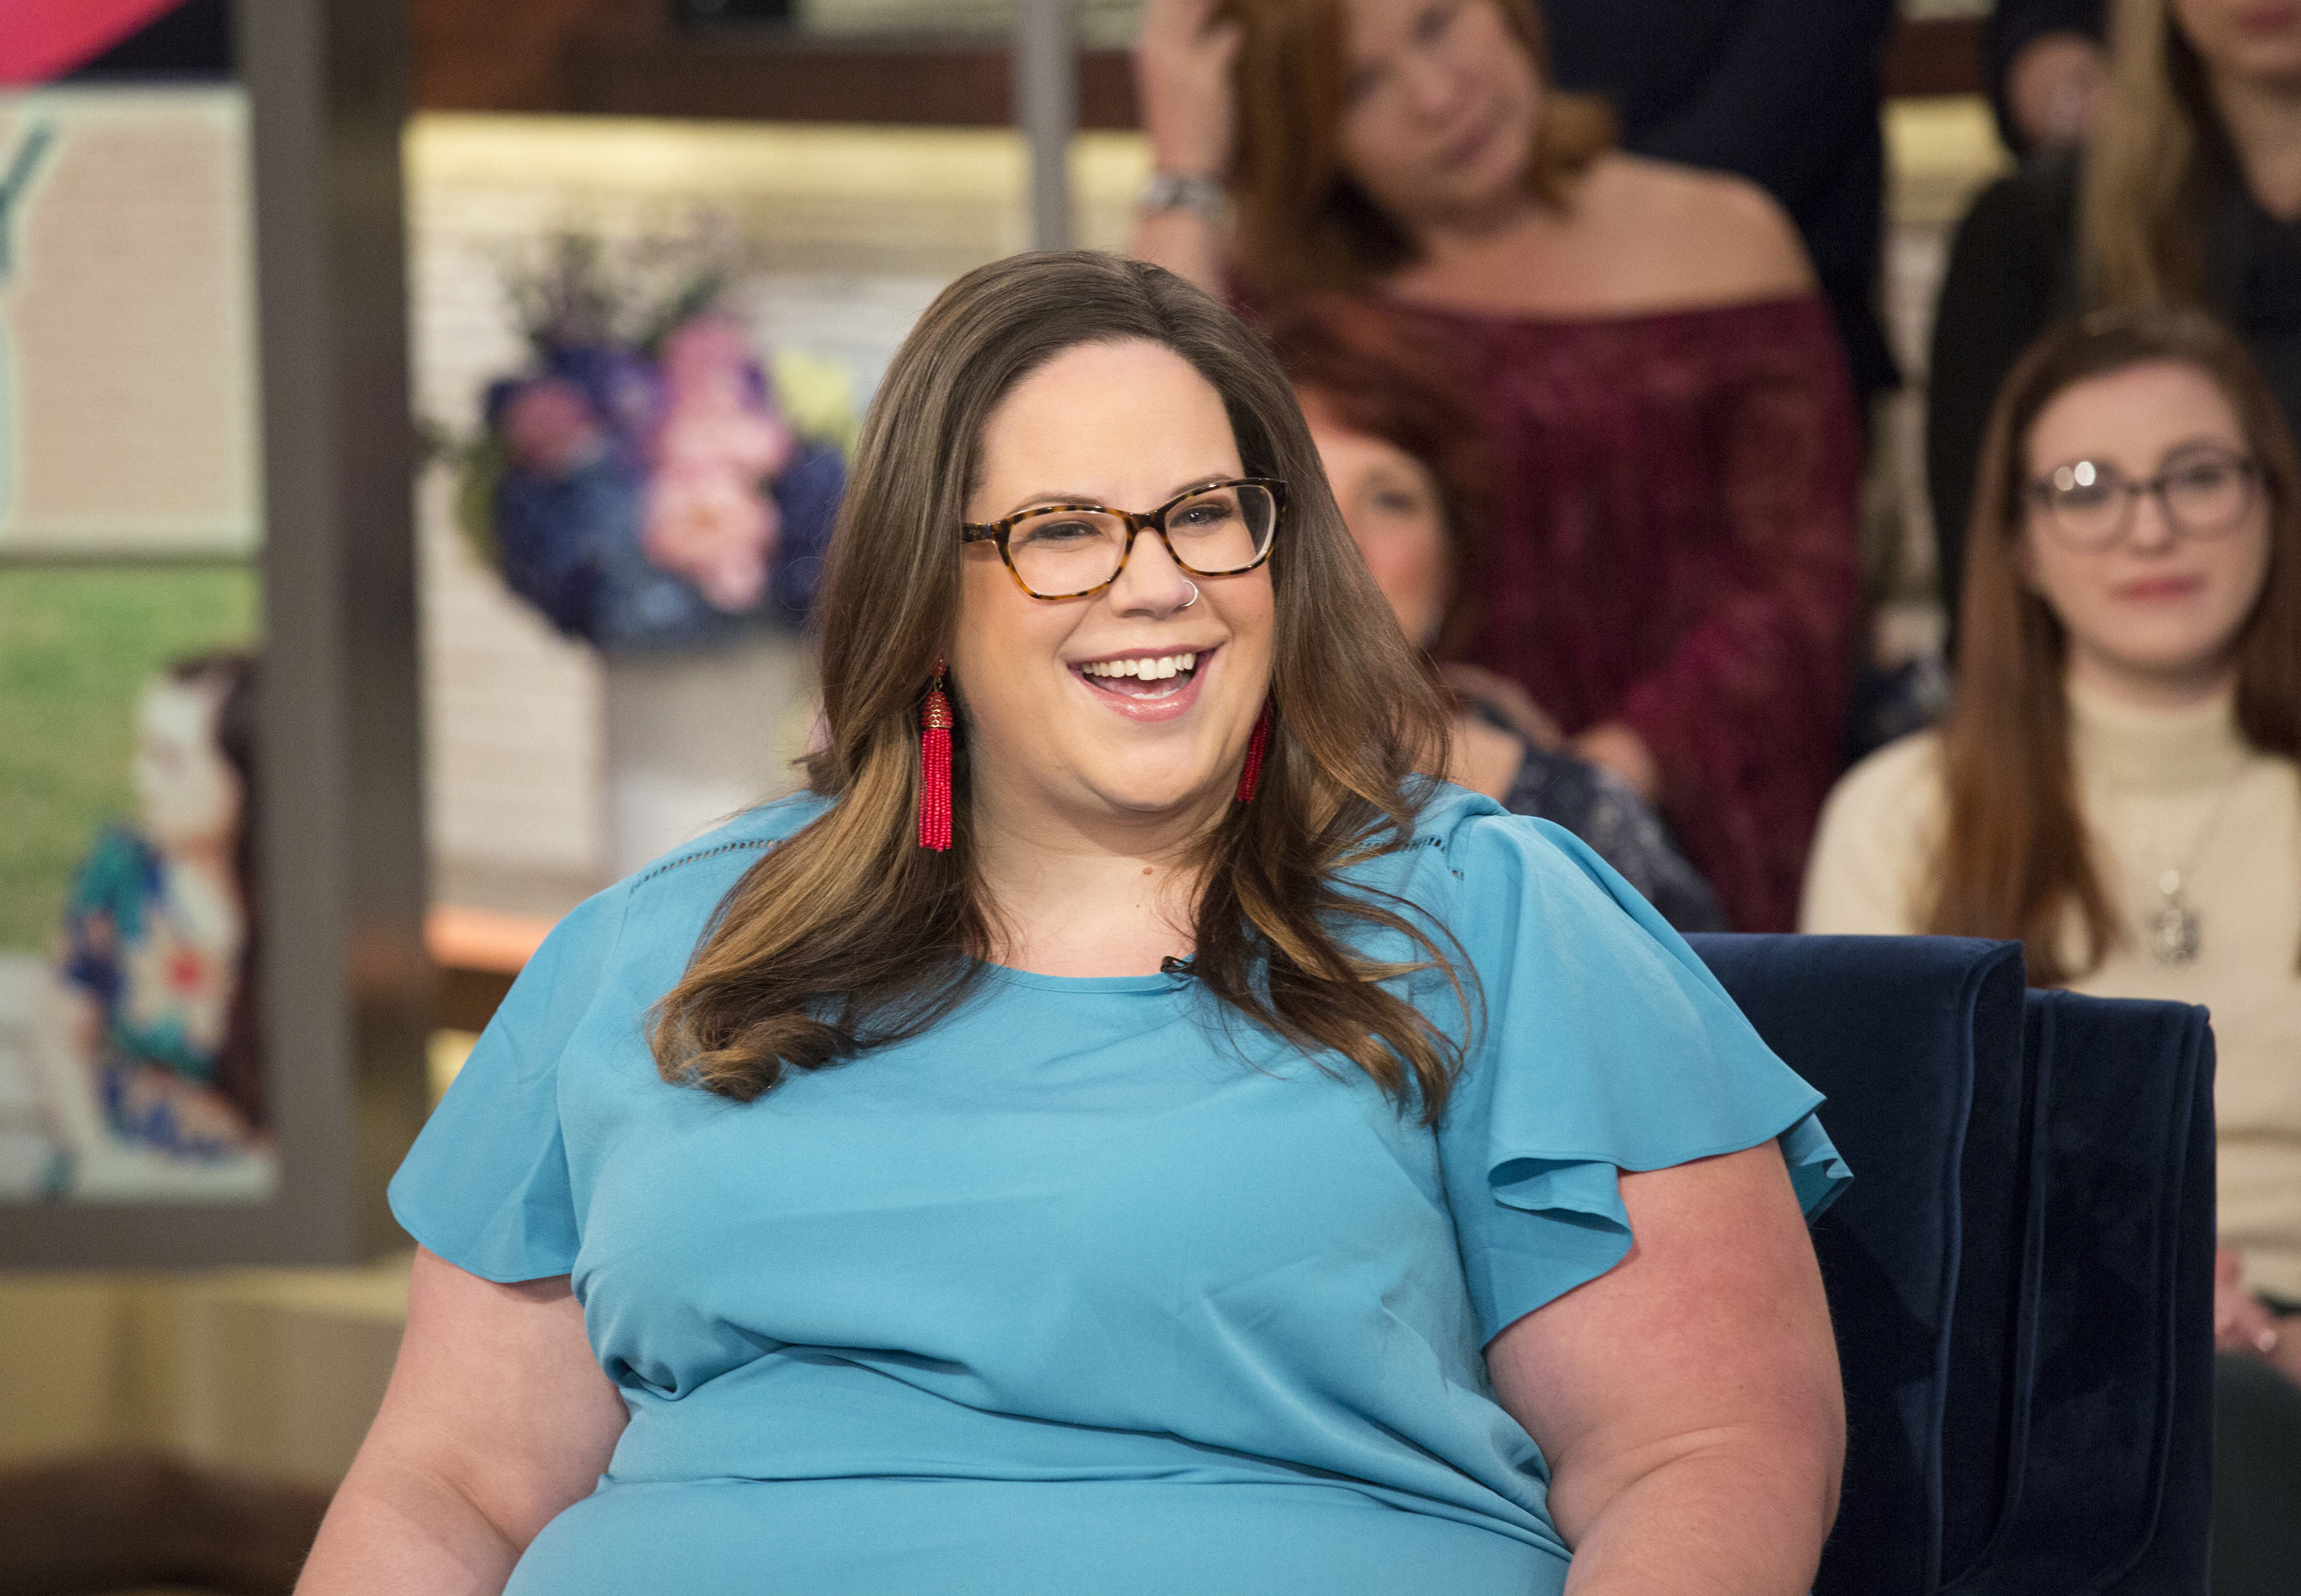 'My Big Fat Fabulous Life' star Whitney Thore wearing a blue blouse, red earrings, and glasses during a talk show appearance.